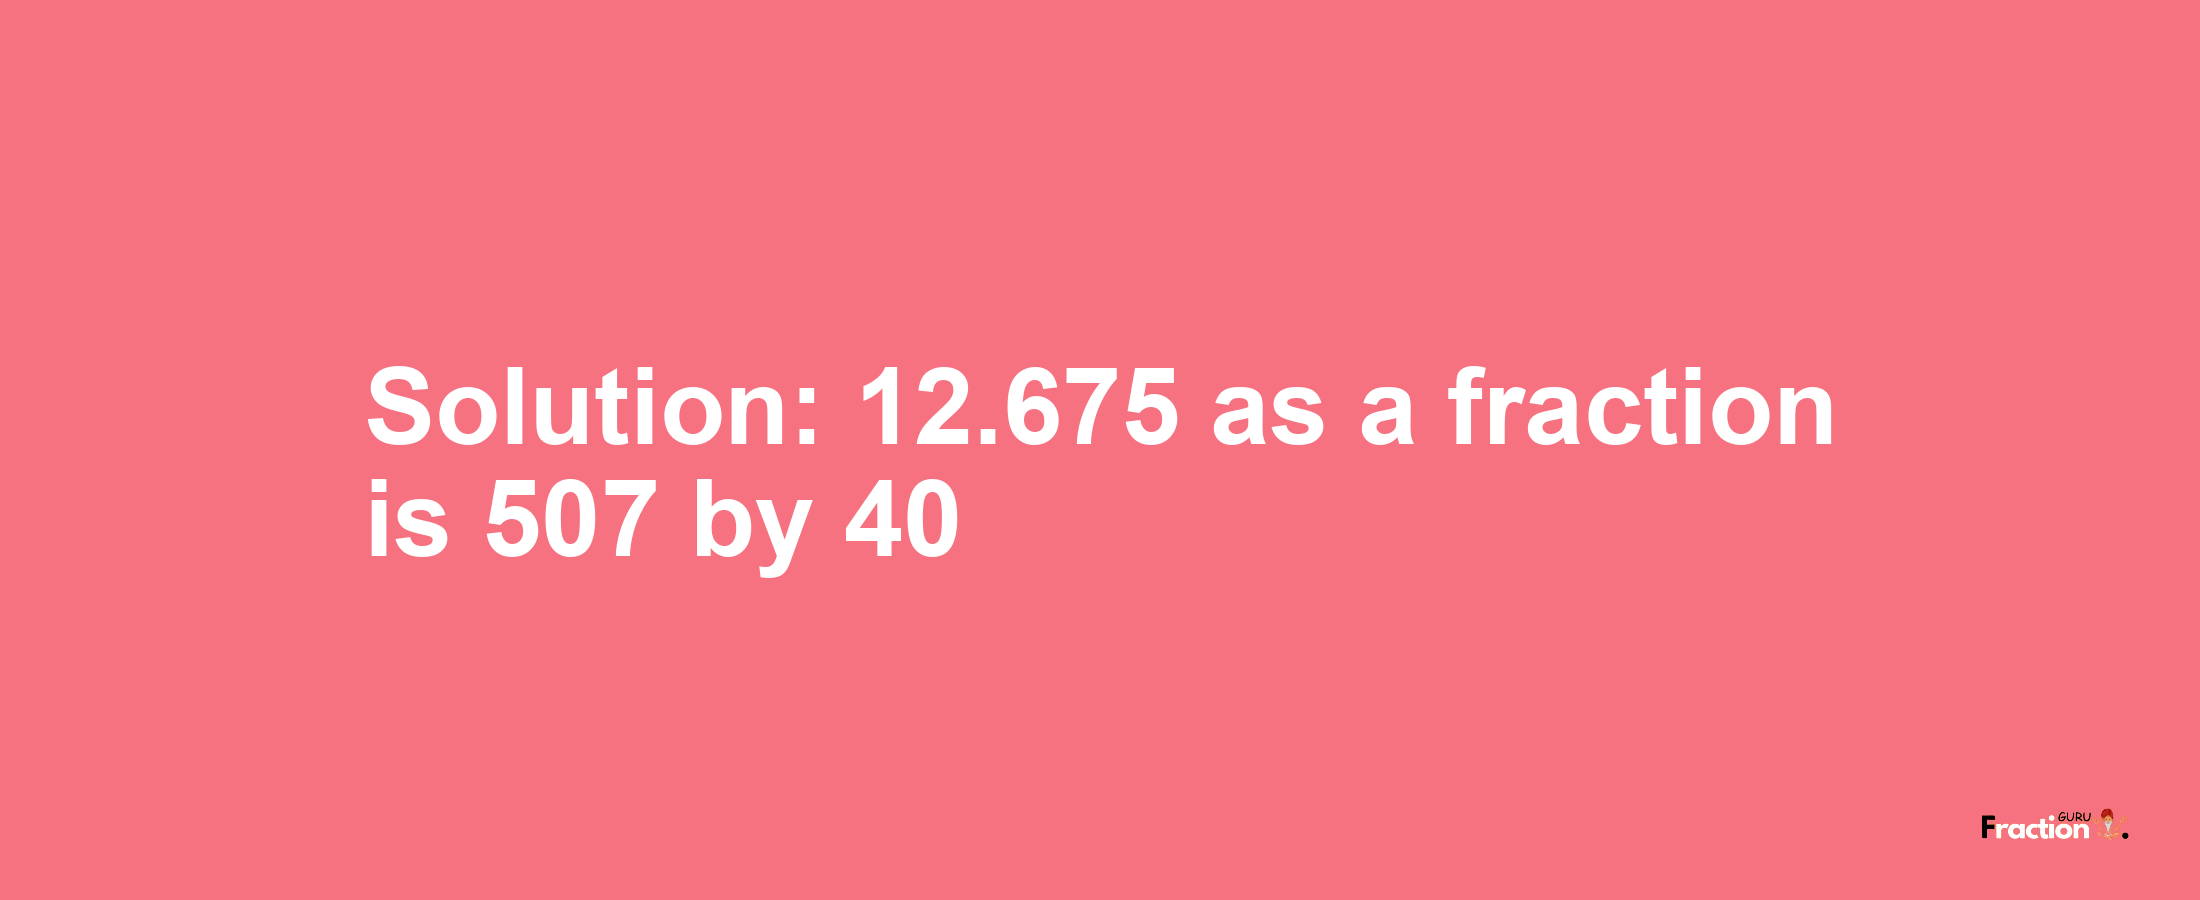 Solution:12.675 as a fraction is 507/40